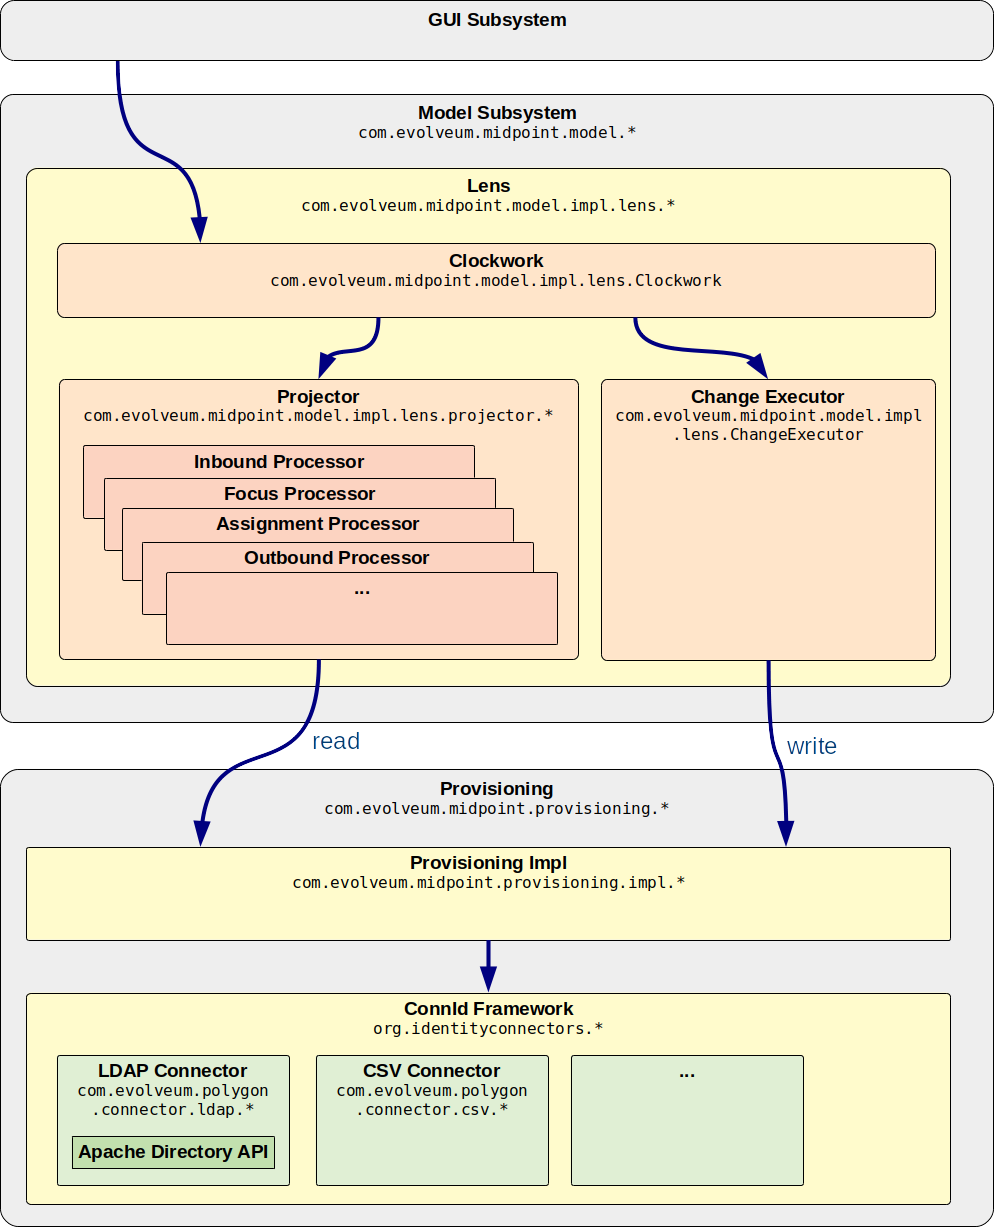 Model and provisioning structure